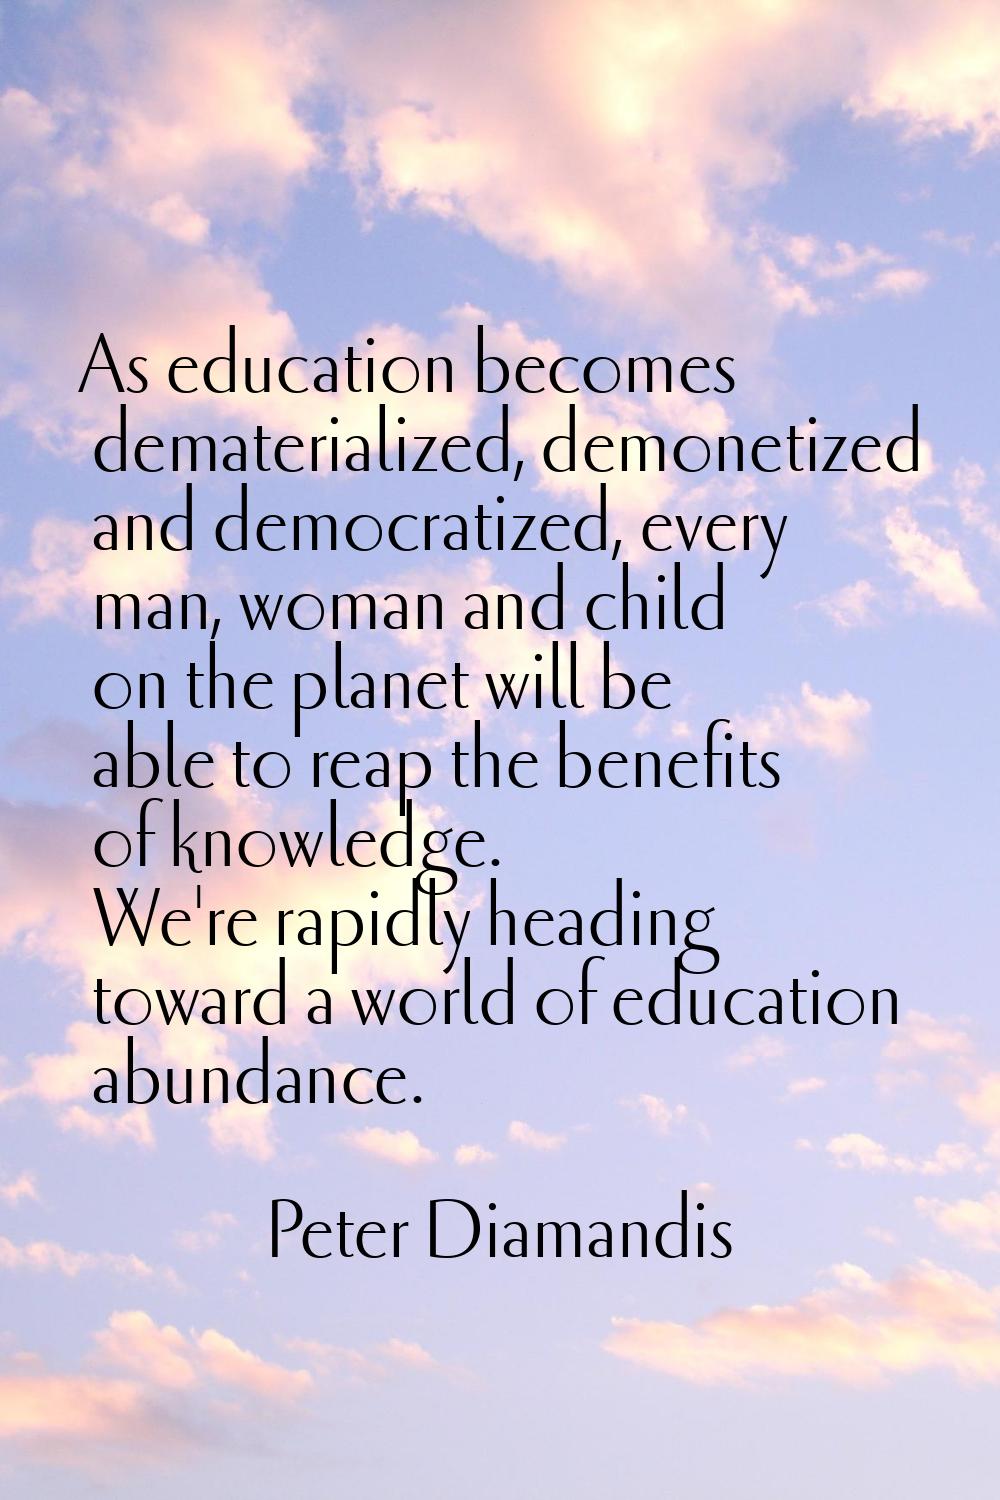 As education becomes dematerialized, demonetized and democratized, every man, woman and child on th